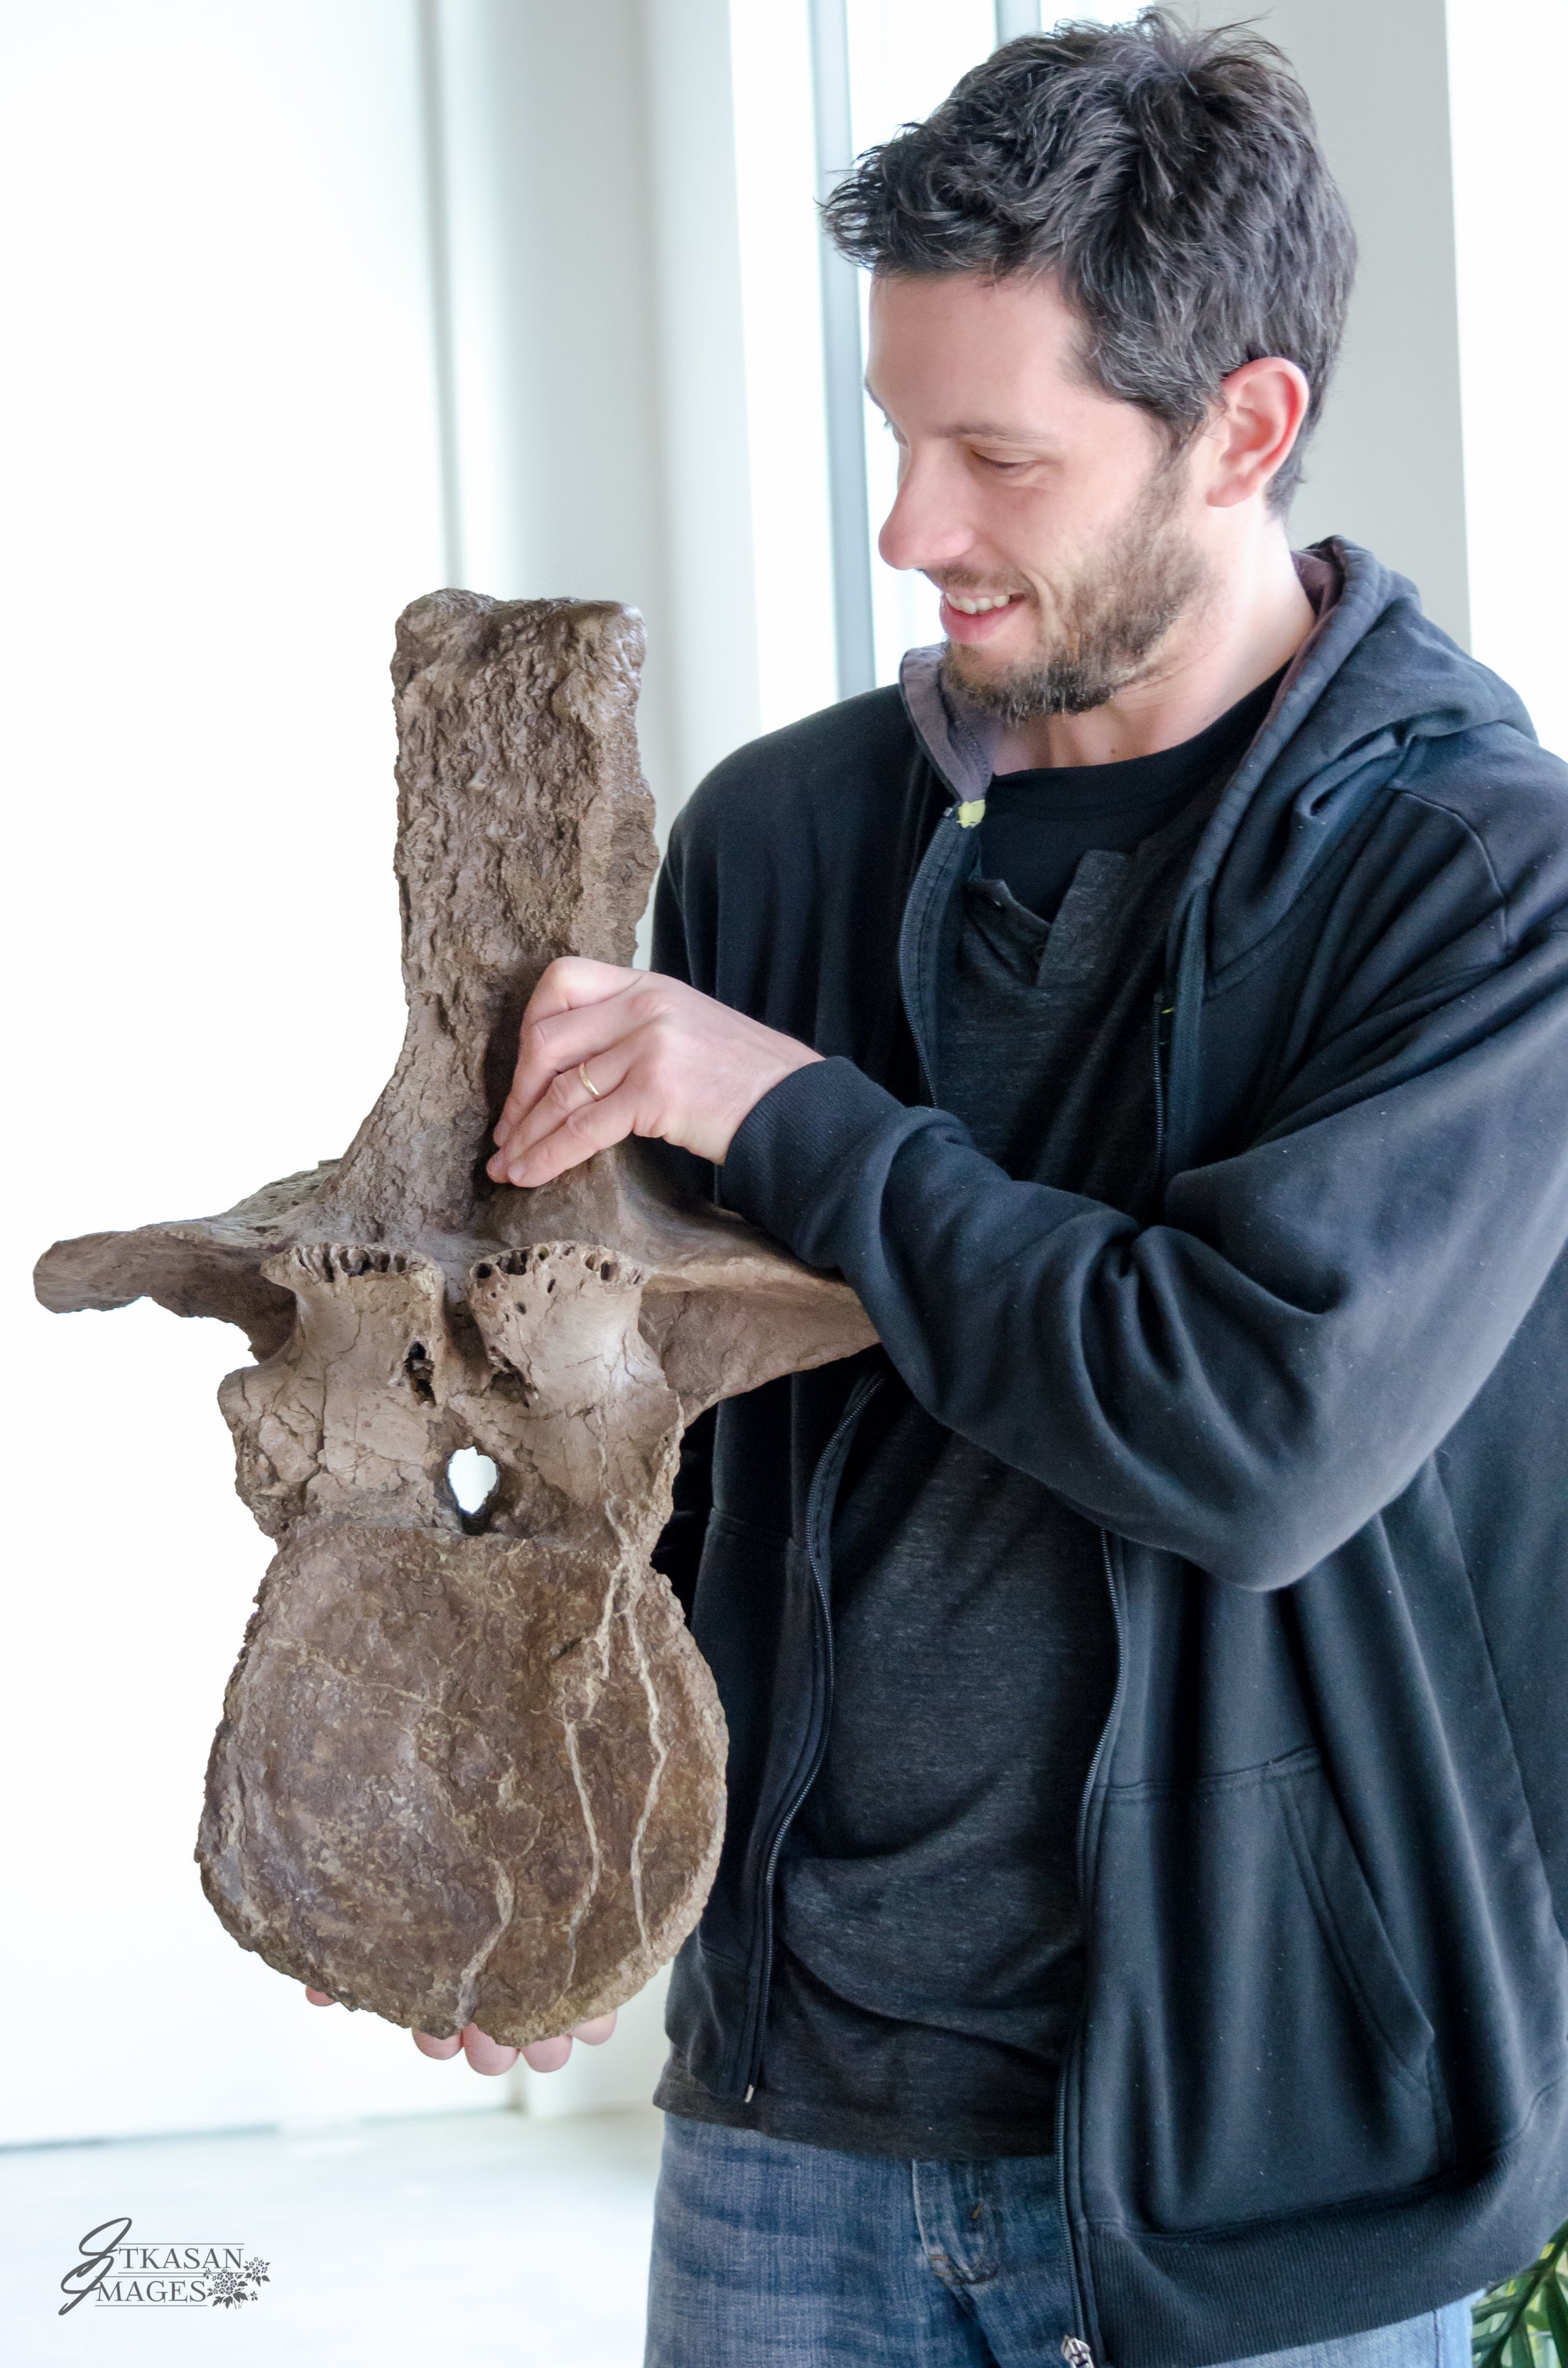 Tyrannosaurus rex - skull  One of our visitors holding a T.rex dorsal vertebrae.    (approx. 65 million years old)    Photo credit: Itkasan Images, Victoria BC